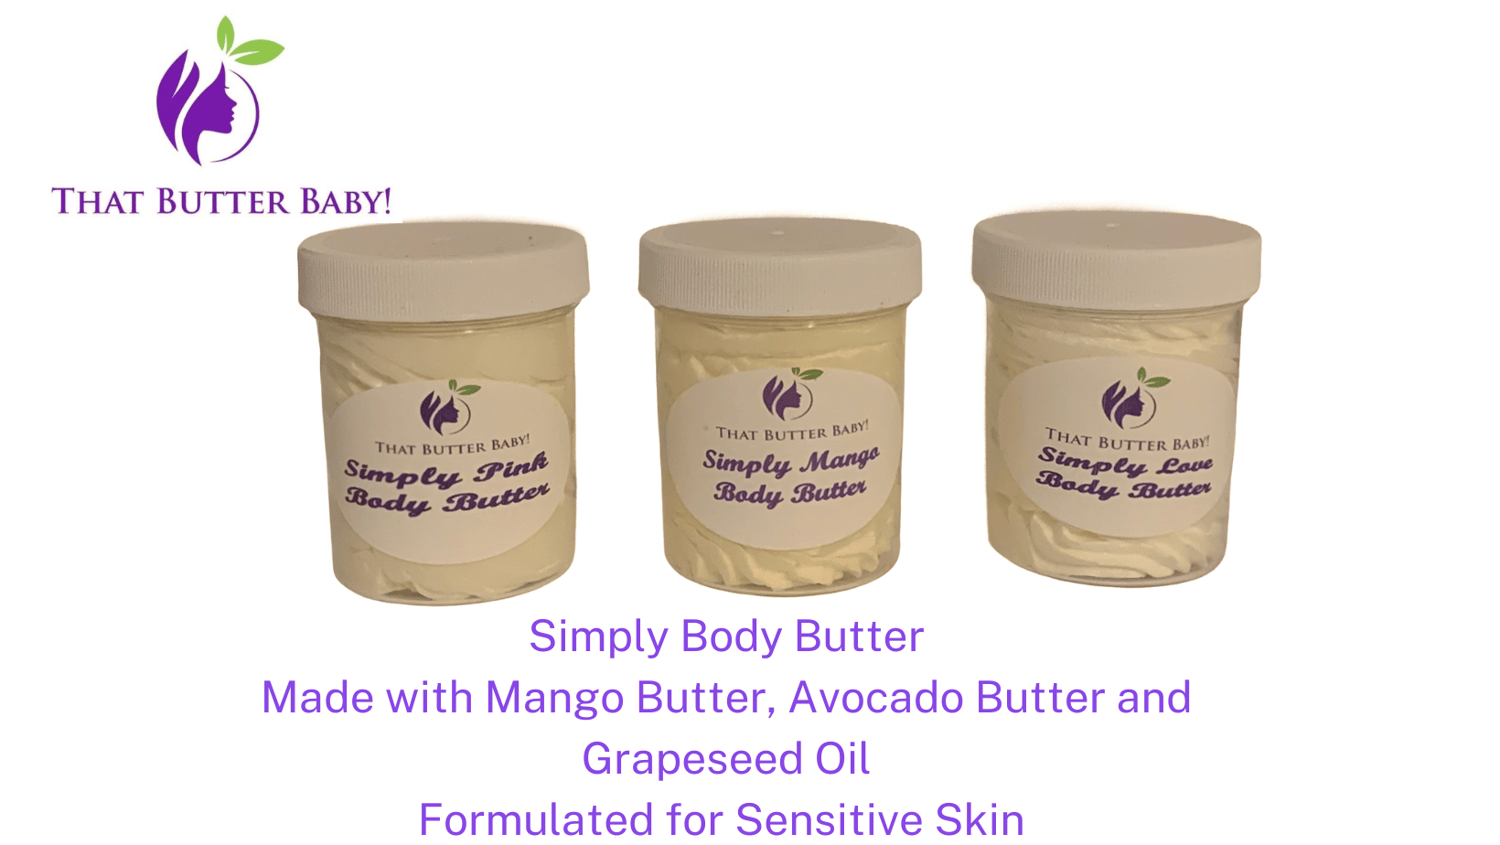 TBB SIMPLY BODY BUTTER | That Butter Baby